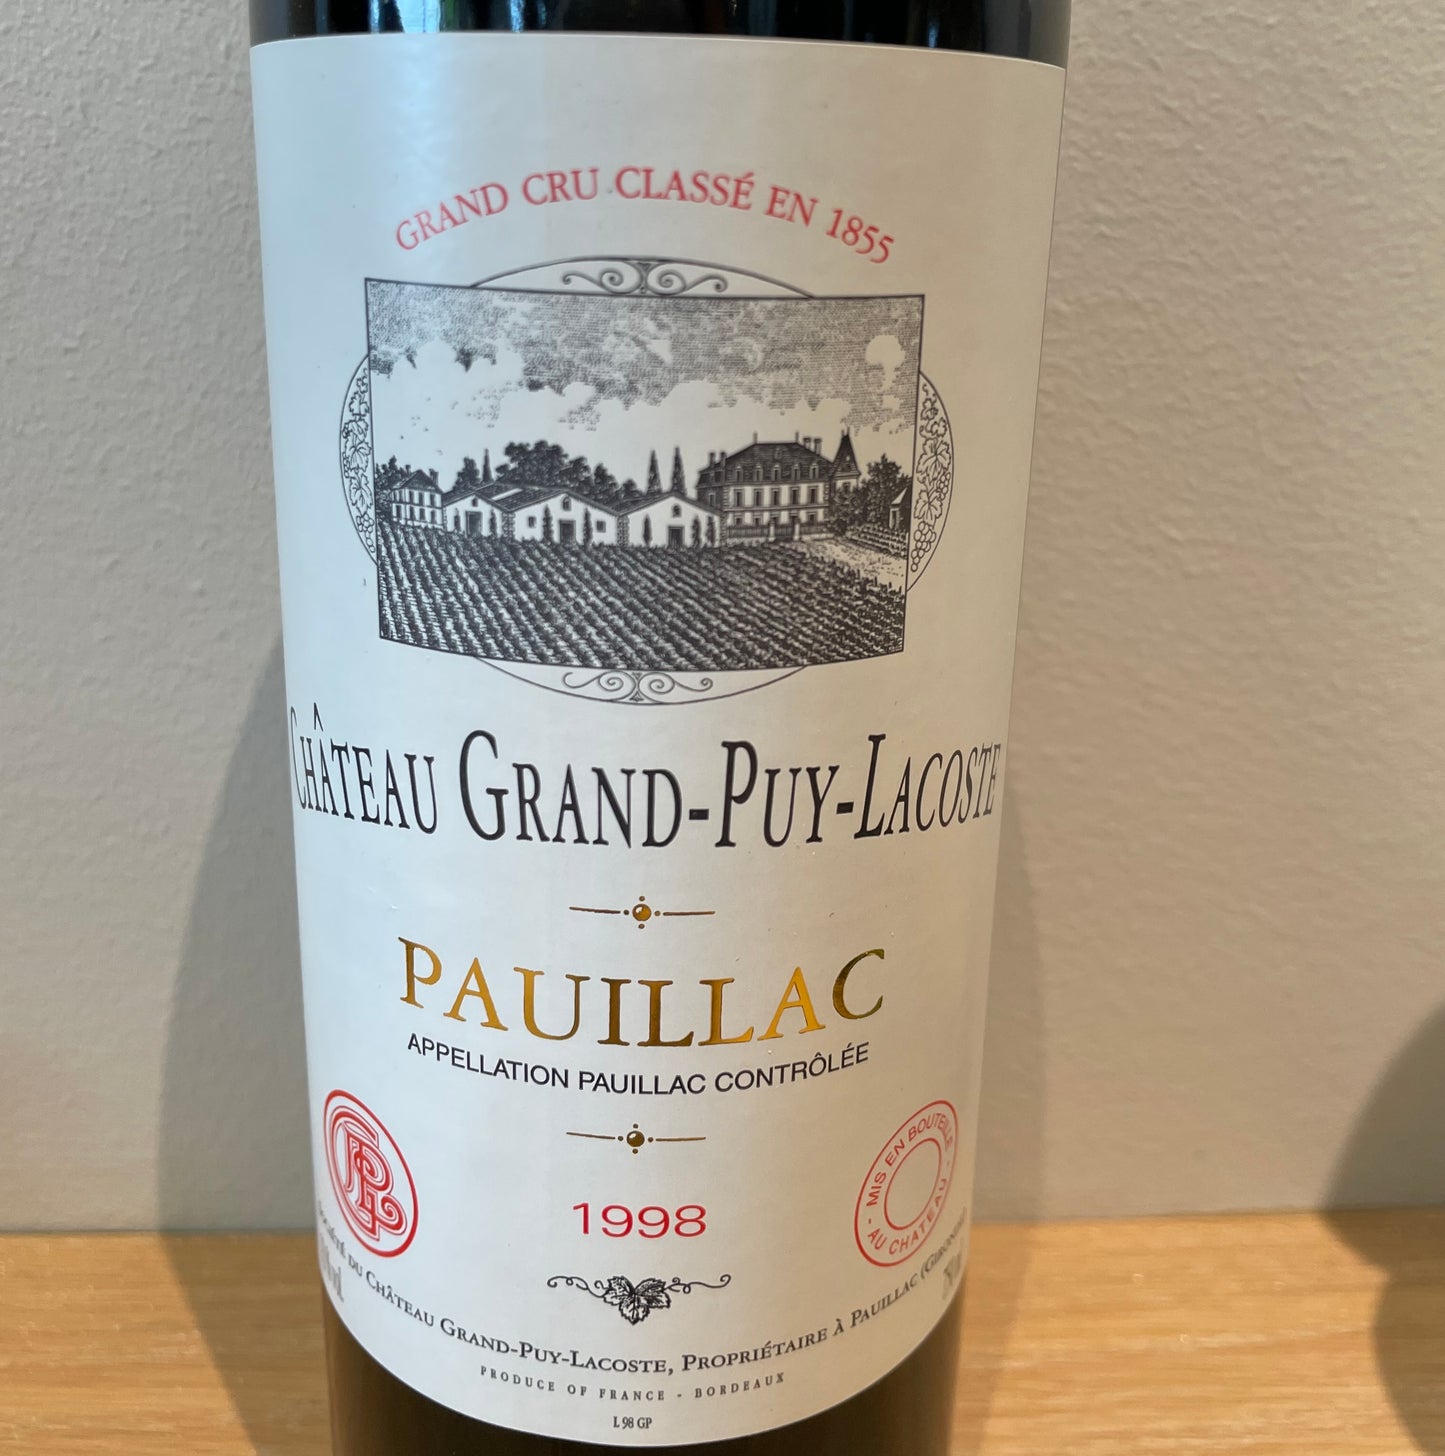 1998 Chateau Grand-Puy-Lacoste Pauillac